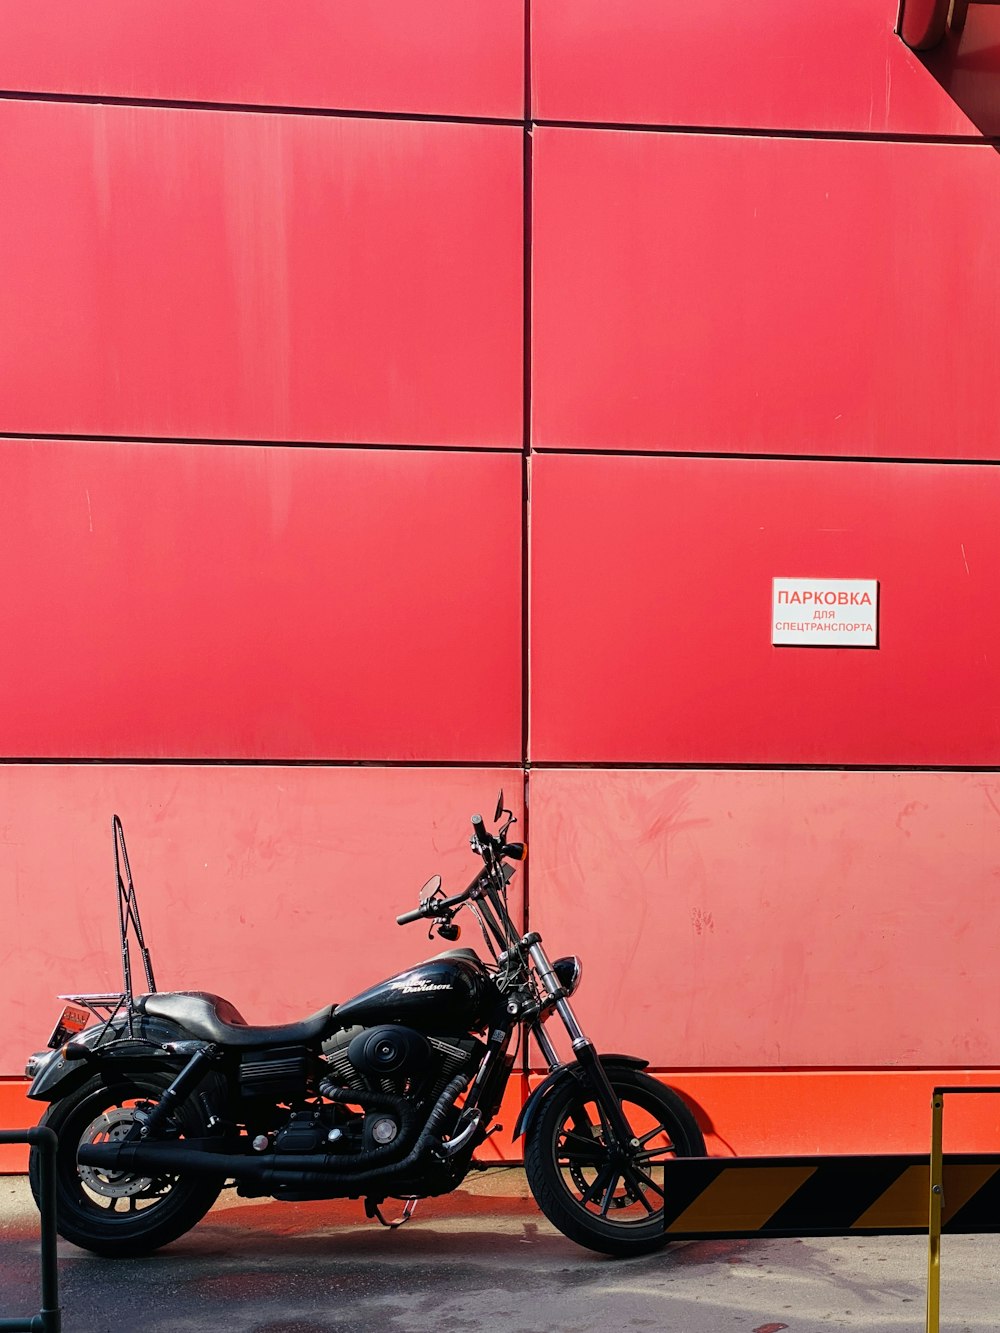 a motorcycle parked in front of a red wall